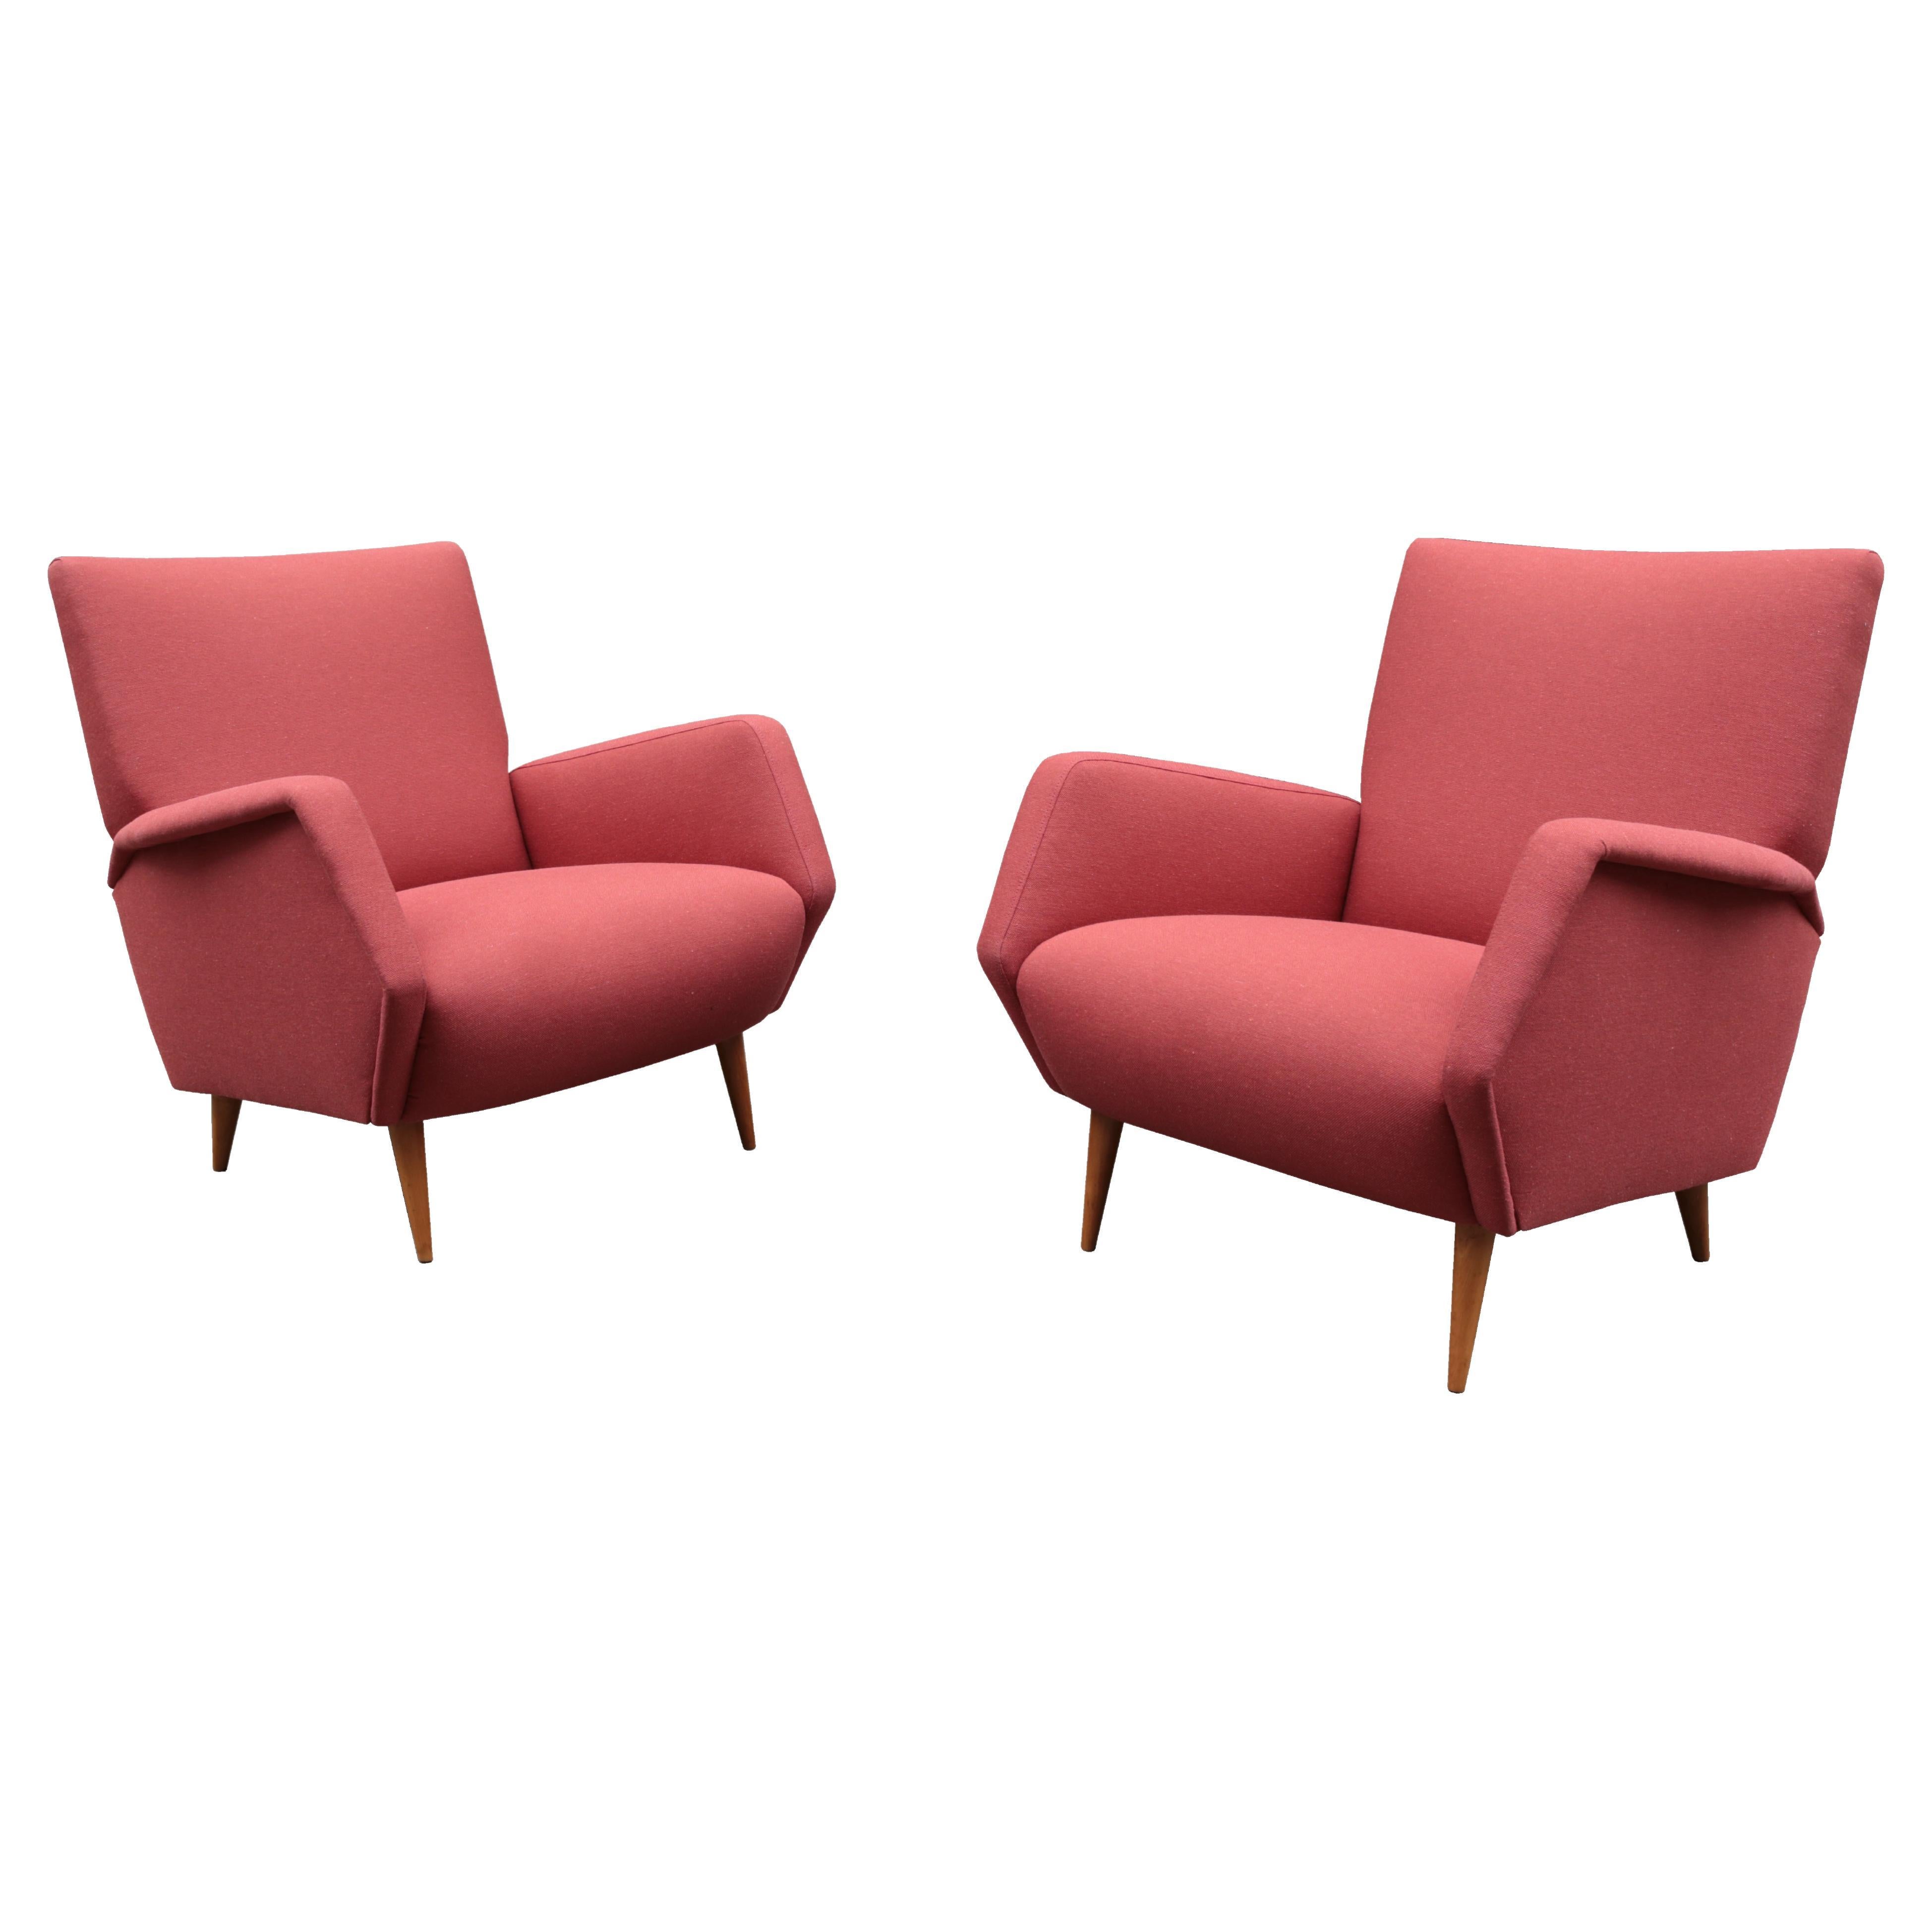 Pair of Cassina Armchairs Designed by Gio Ponti